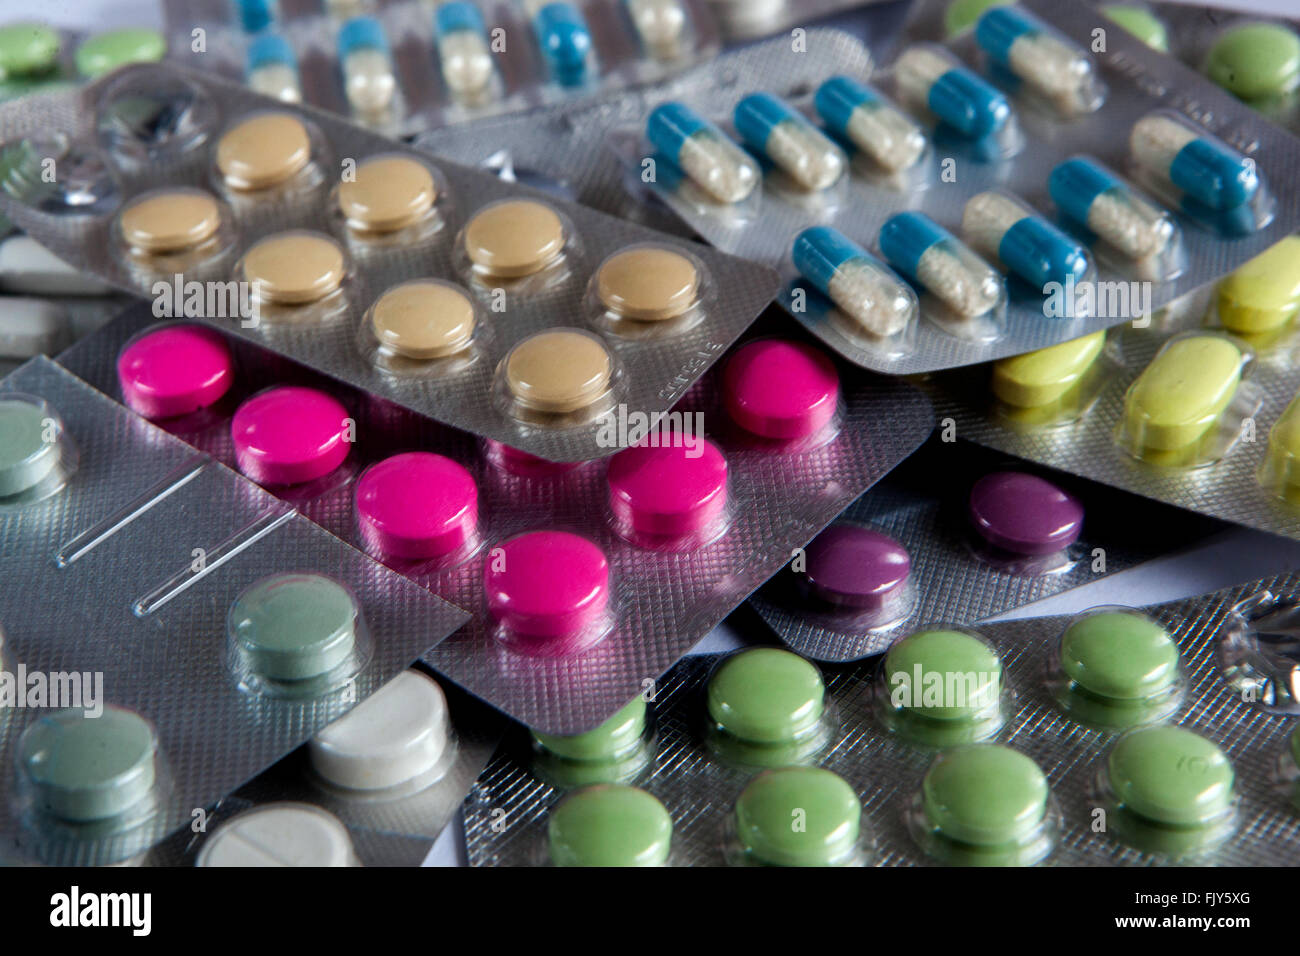 Capsules and colorful Pills tablets Stock Photo